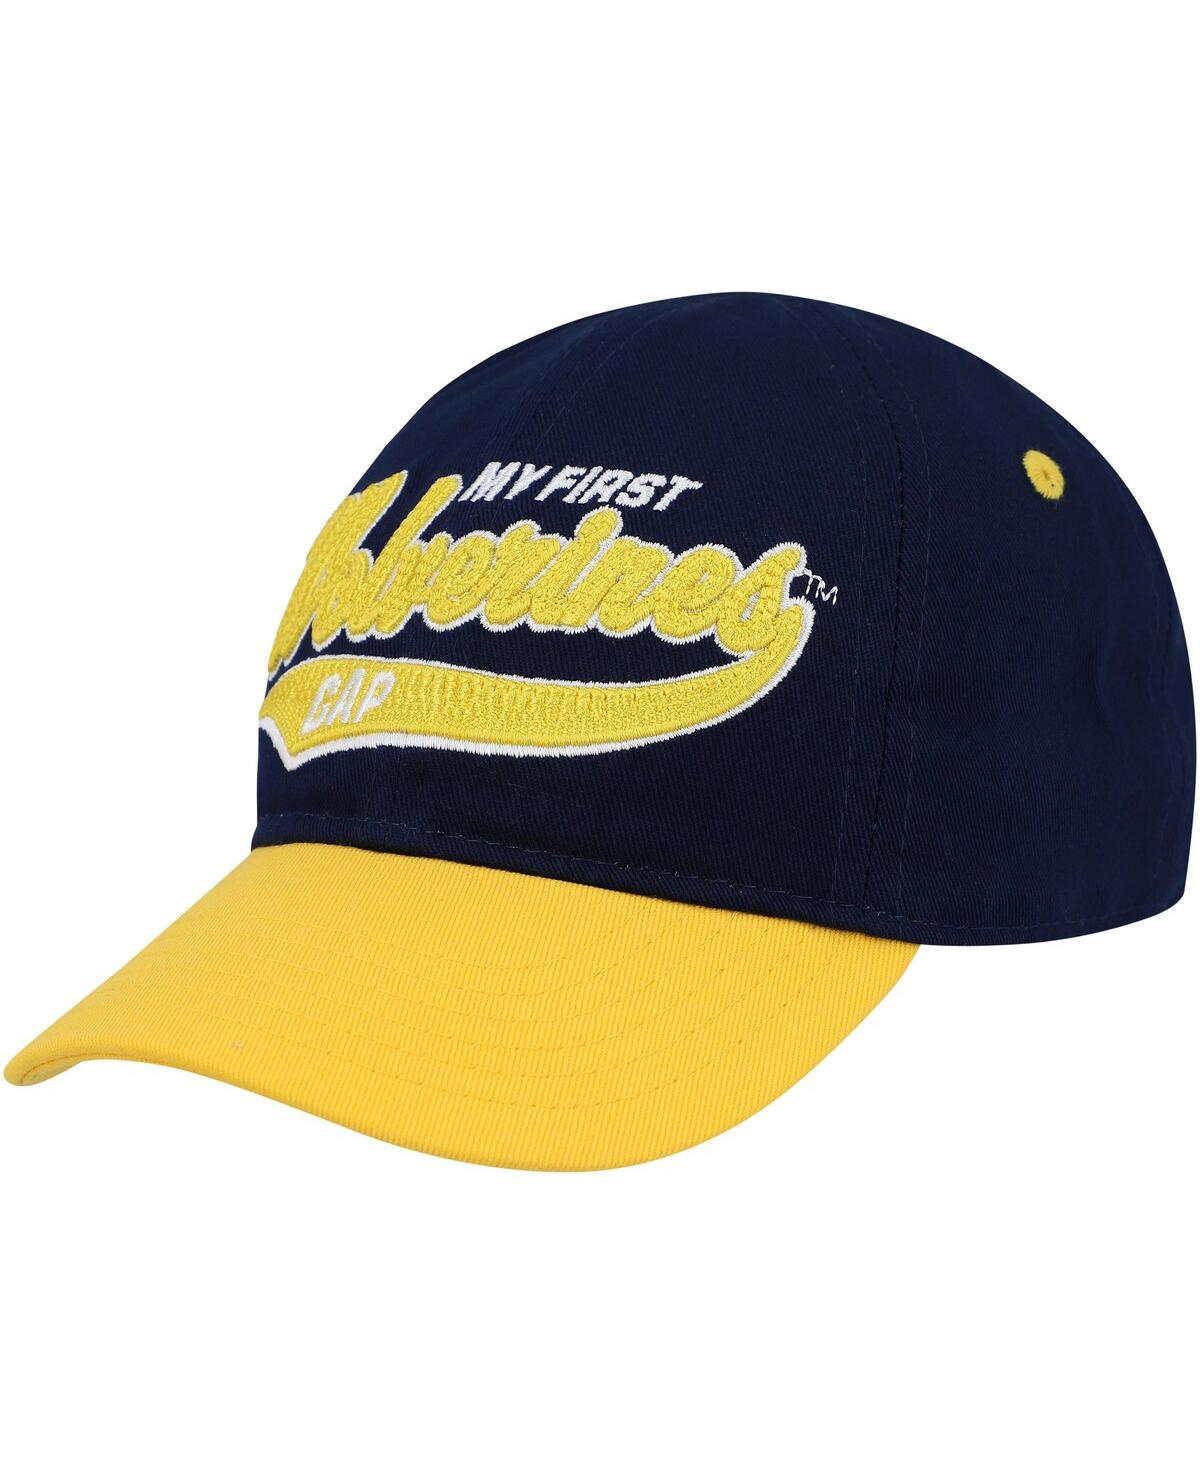 Outerstuff Babies' Infant Boys And Girls Navy, Maize Michigan Wolverines Old School Slouch Flex Hat In Navy,maize